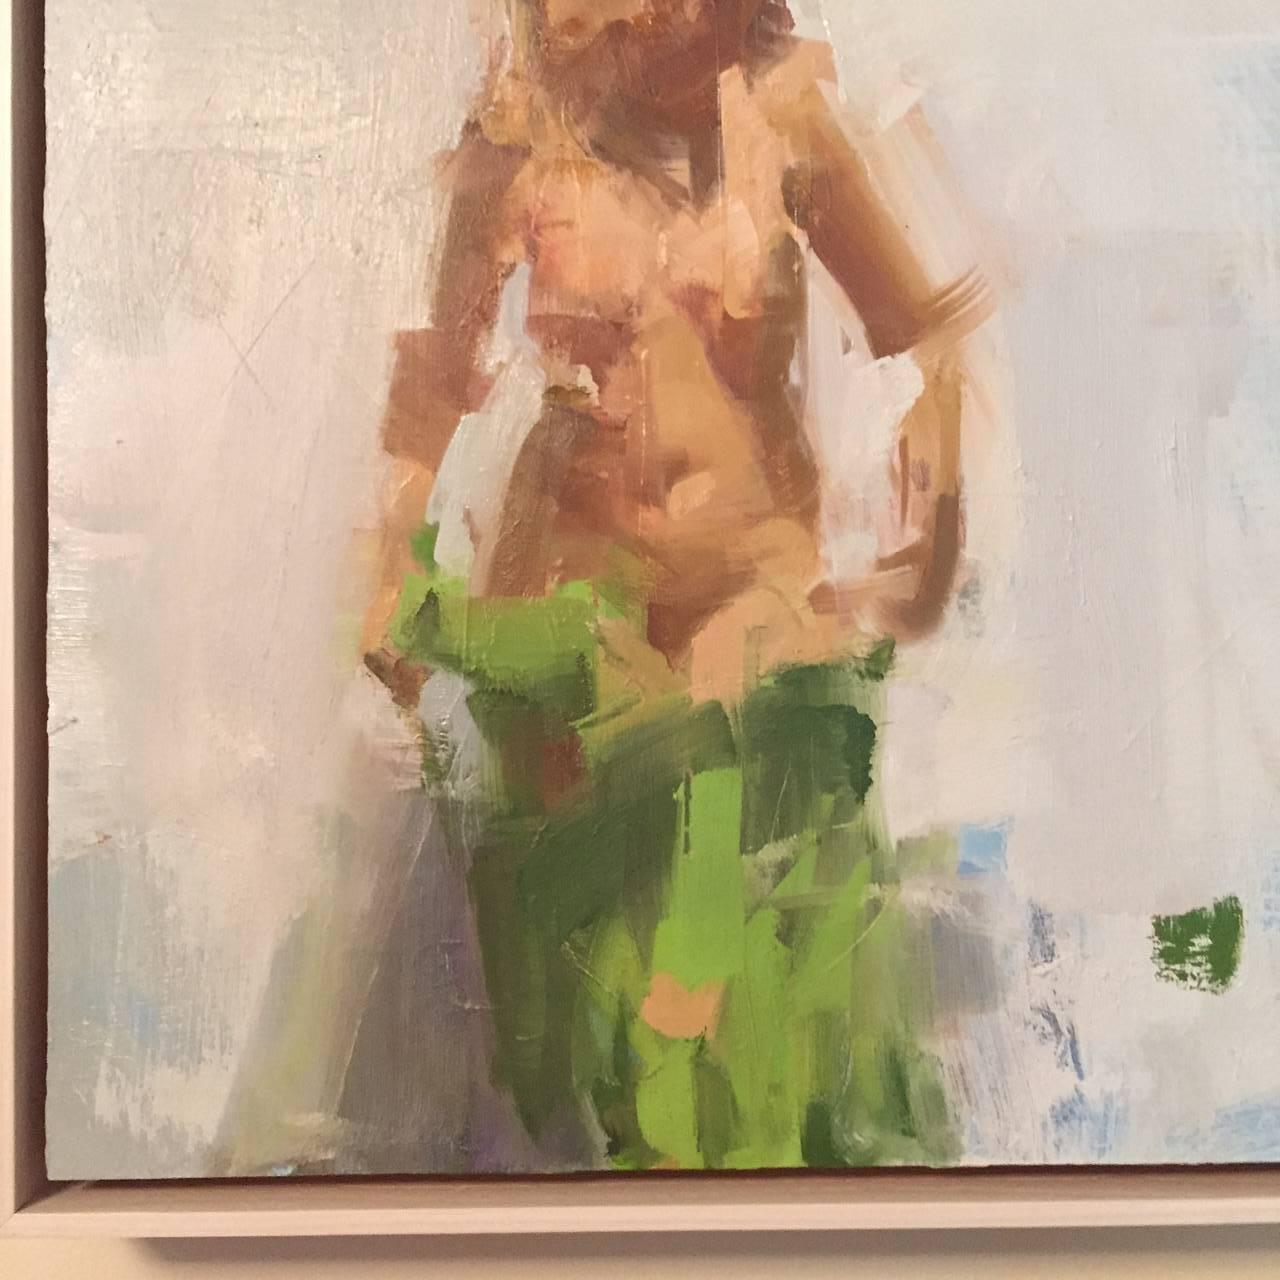 Mel in Green - Contemporary Painting by David Shevlino